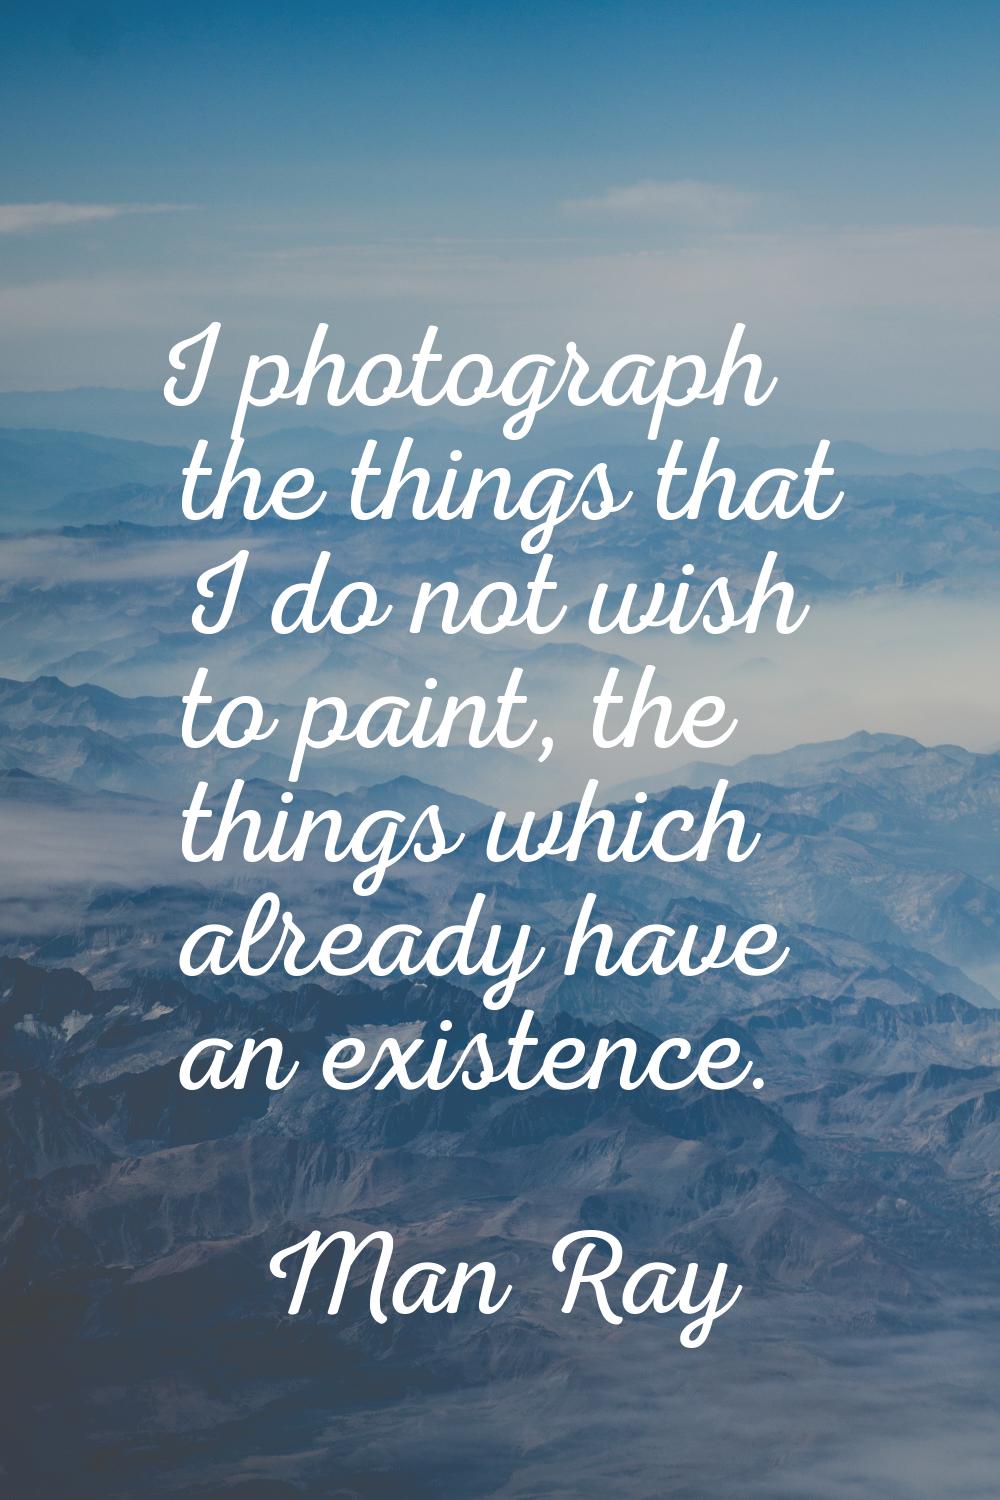 I photograph the things that I do not wish to paint, the things which already have an existence.